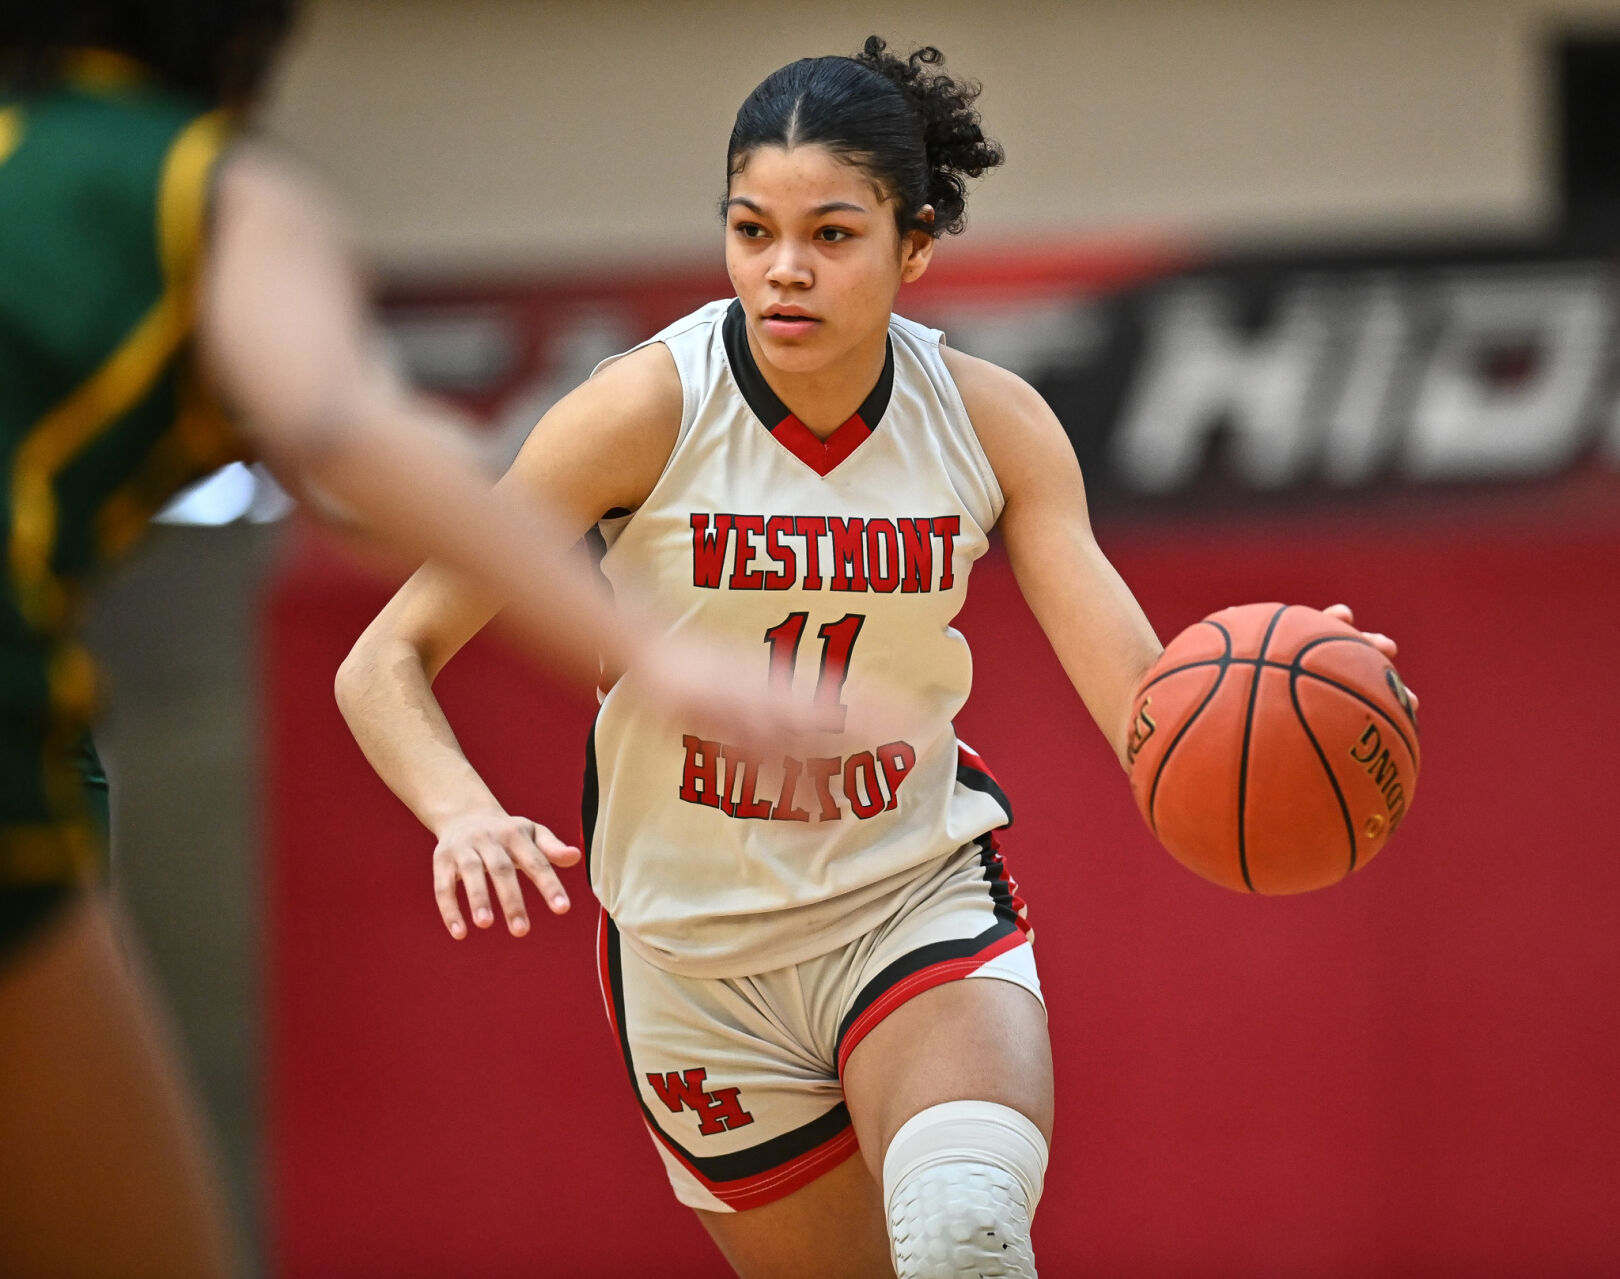 ‘Been unbelievable’: Westmont Hilltop’s Eisenhuth named 3A girls coach of the year, Gordon earns first-team all-state selection to lead 4 area players